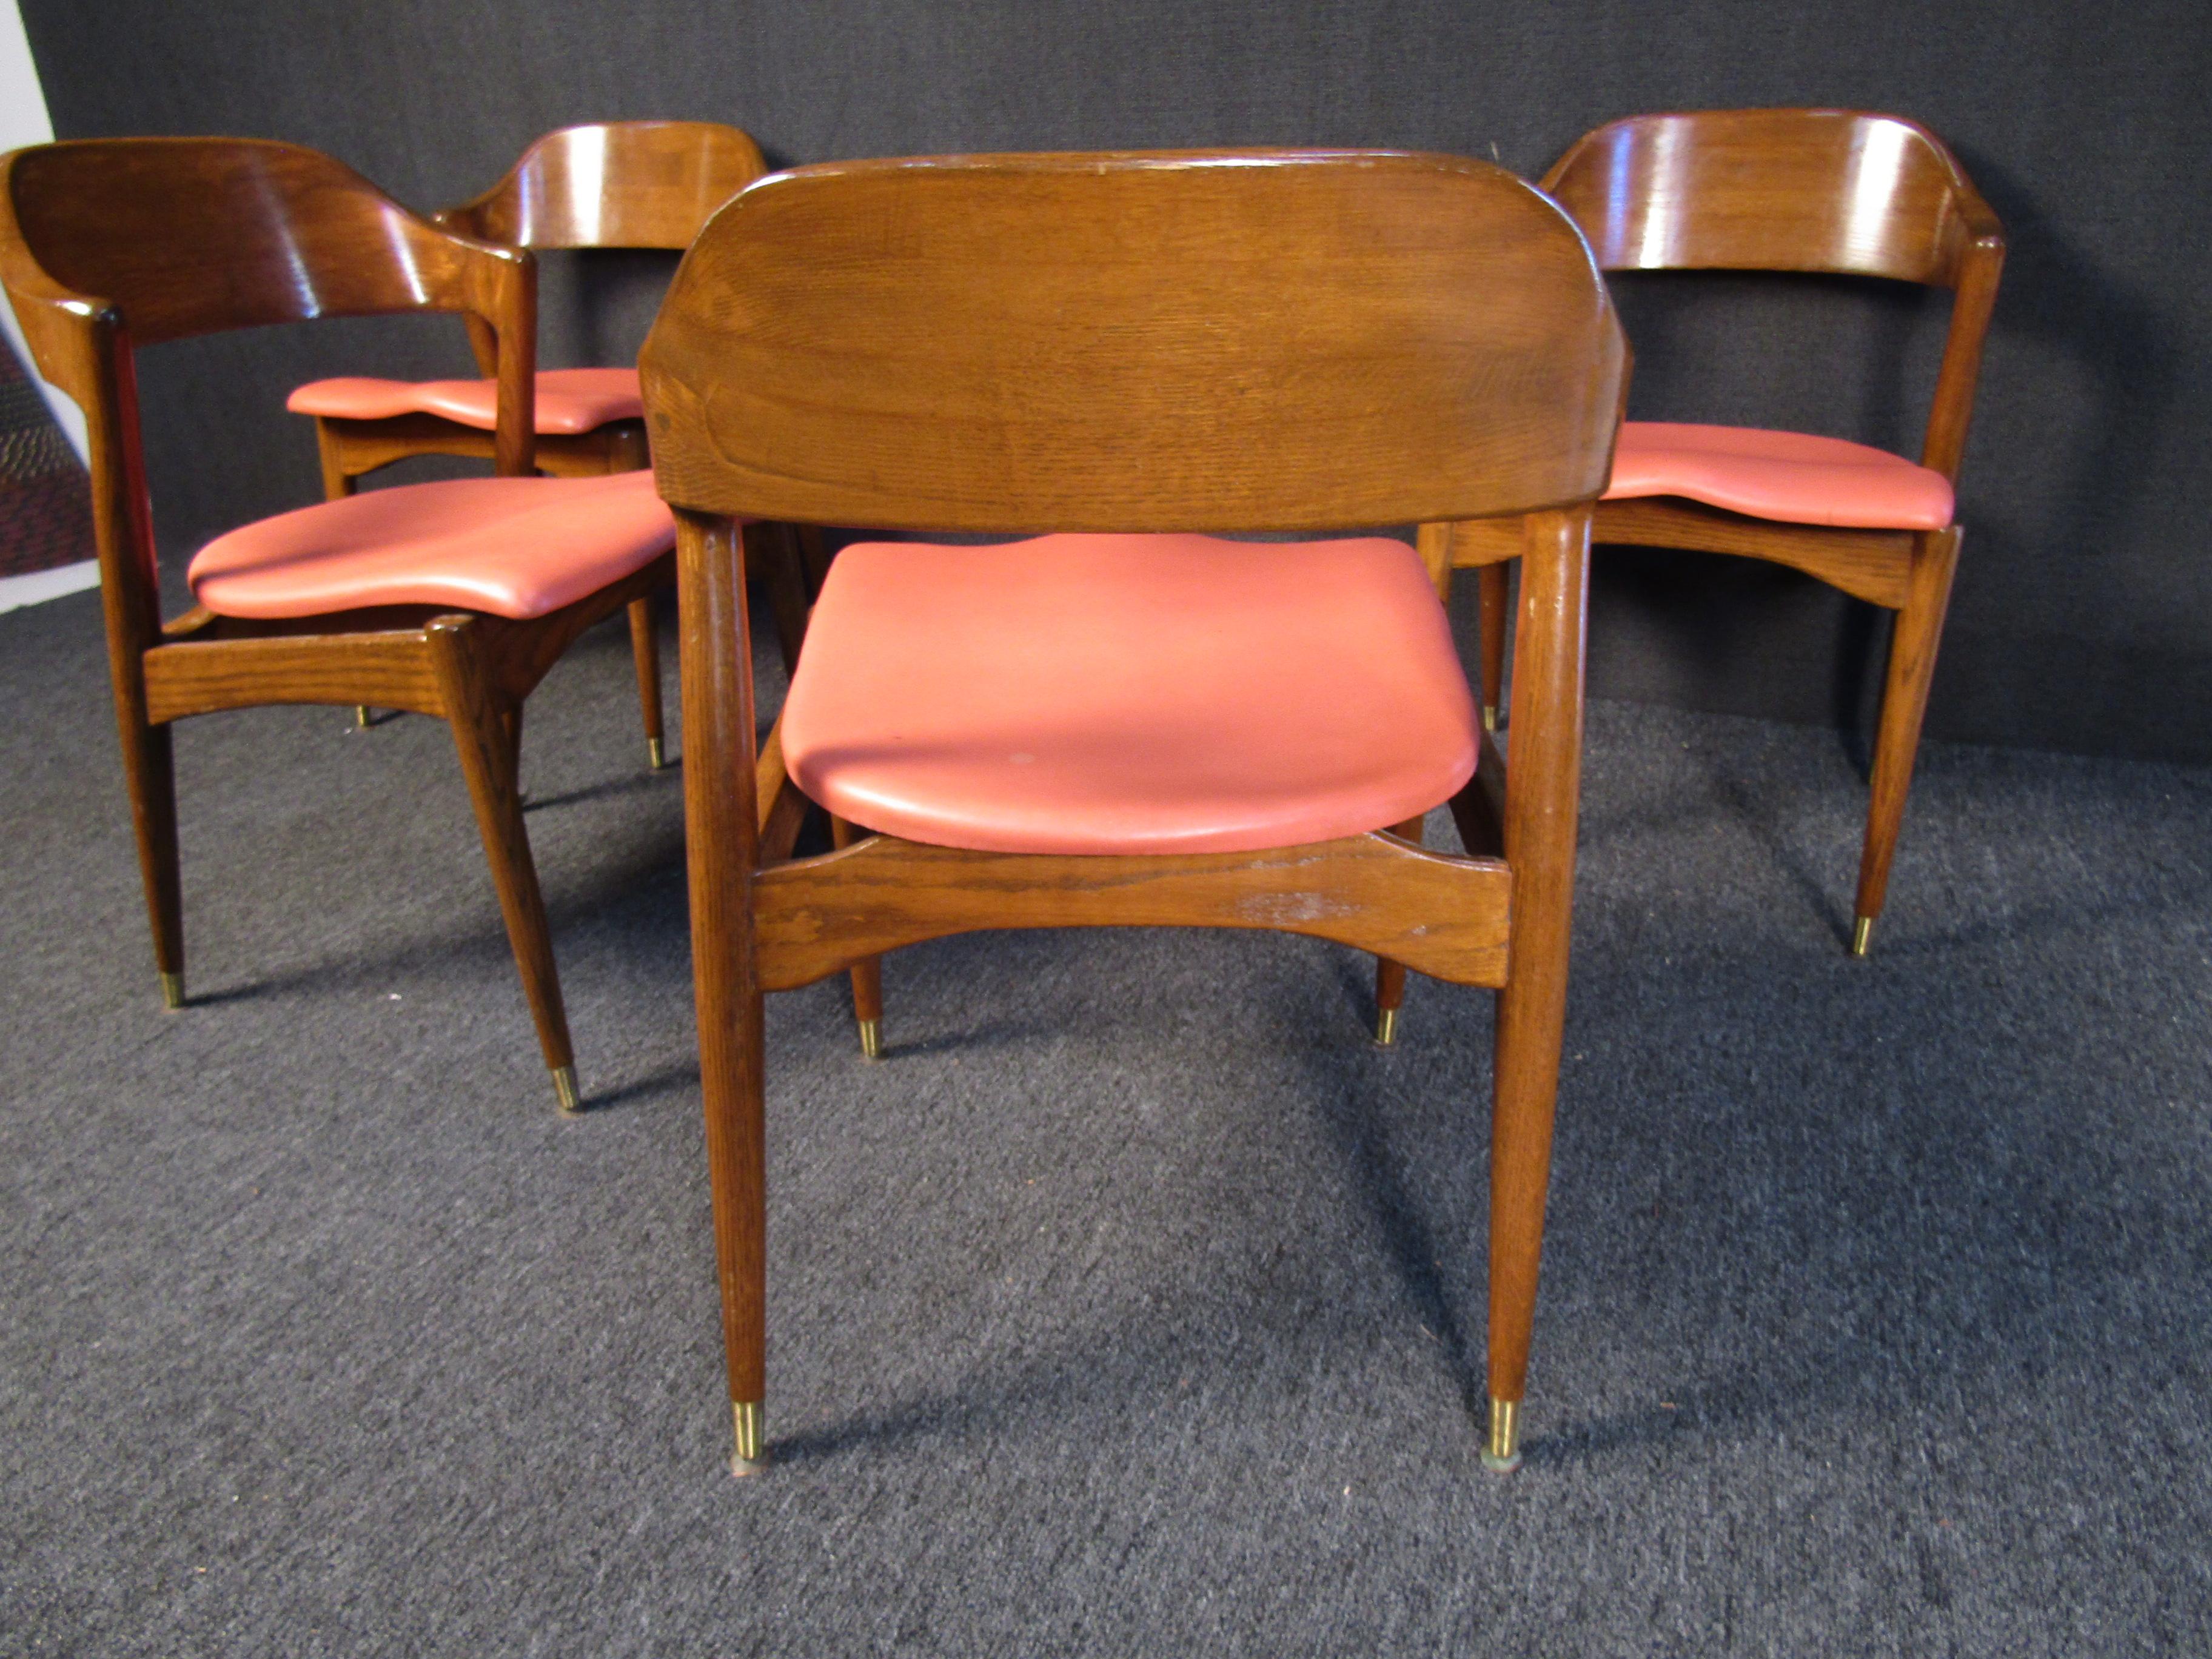 These striking Mid-Century Modern chairs combine an elegant walnut frame with salmon seats and brass footing on the chair legs. Perfect for any dining room or home setting, these chairs are full of sturdy quality and vintage style. Please confirm